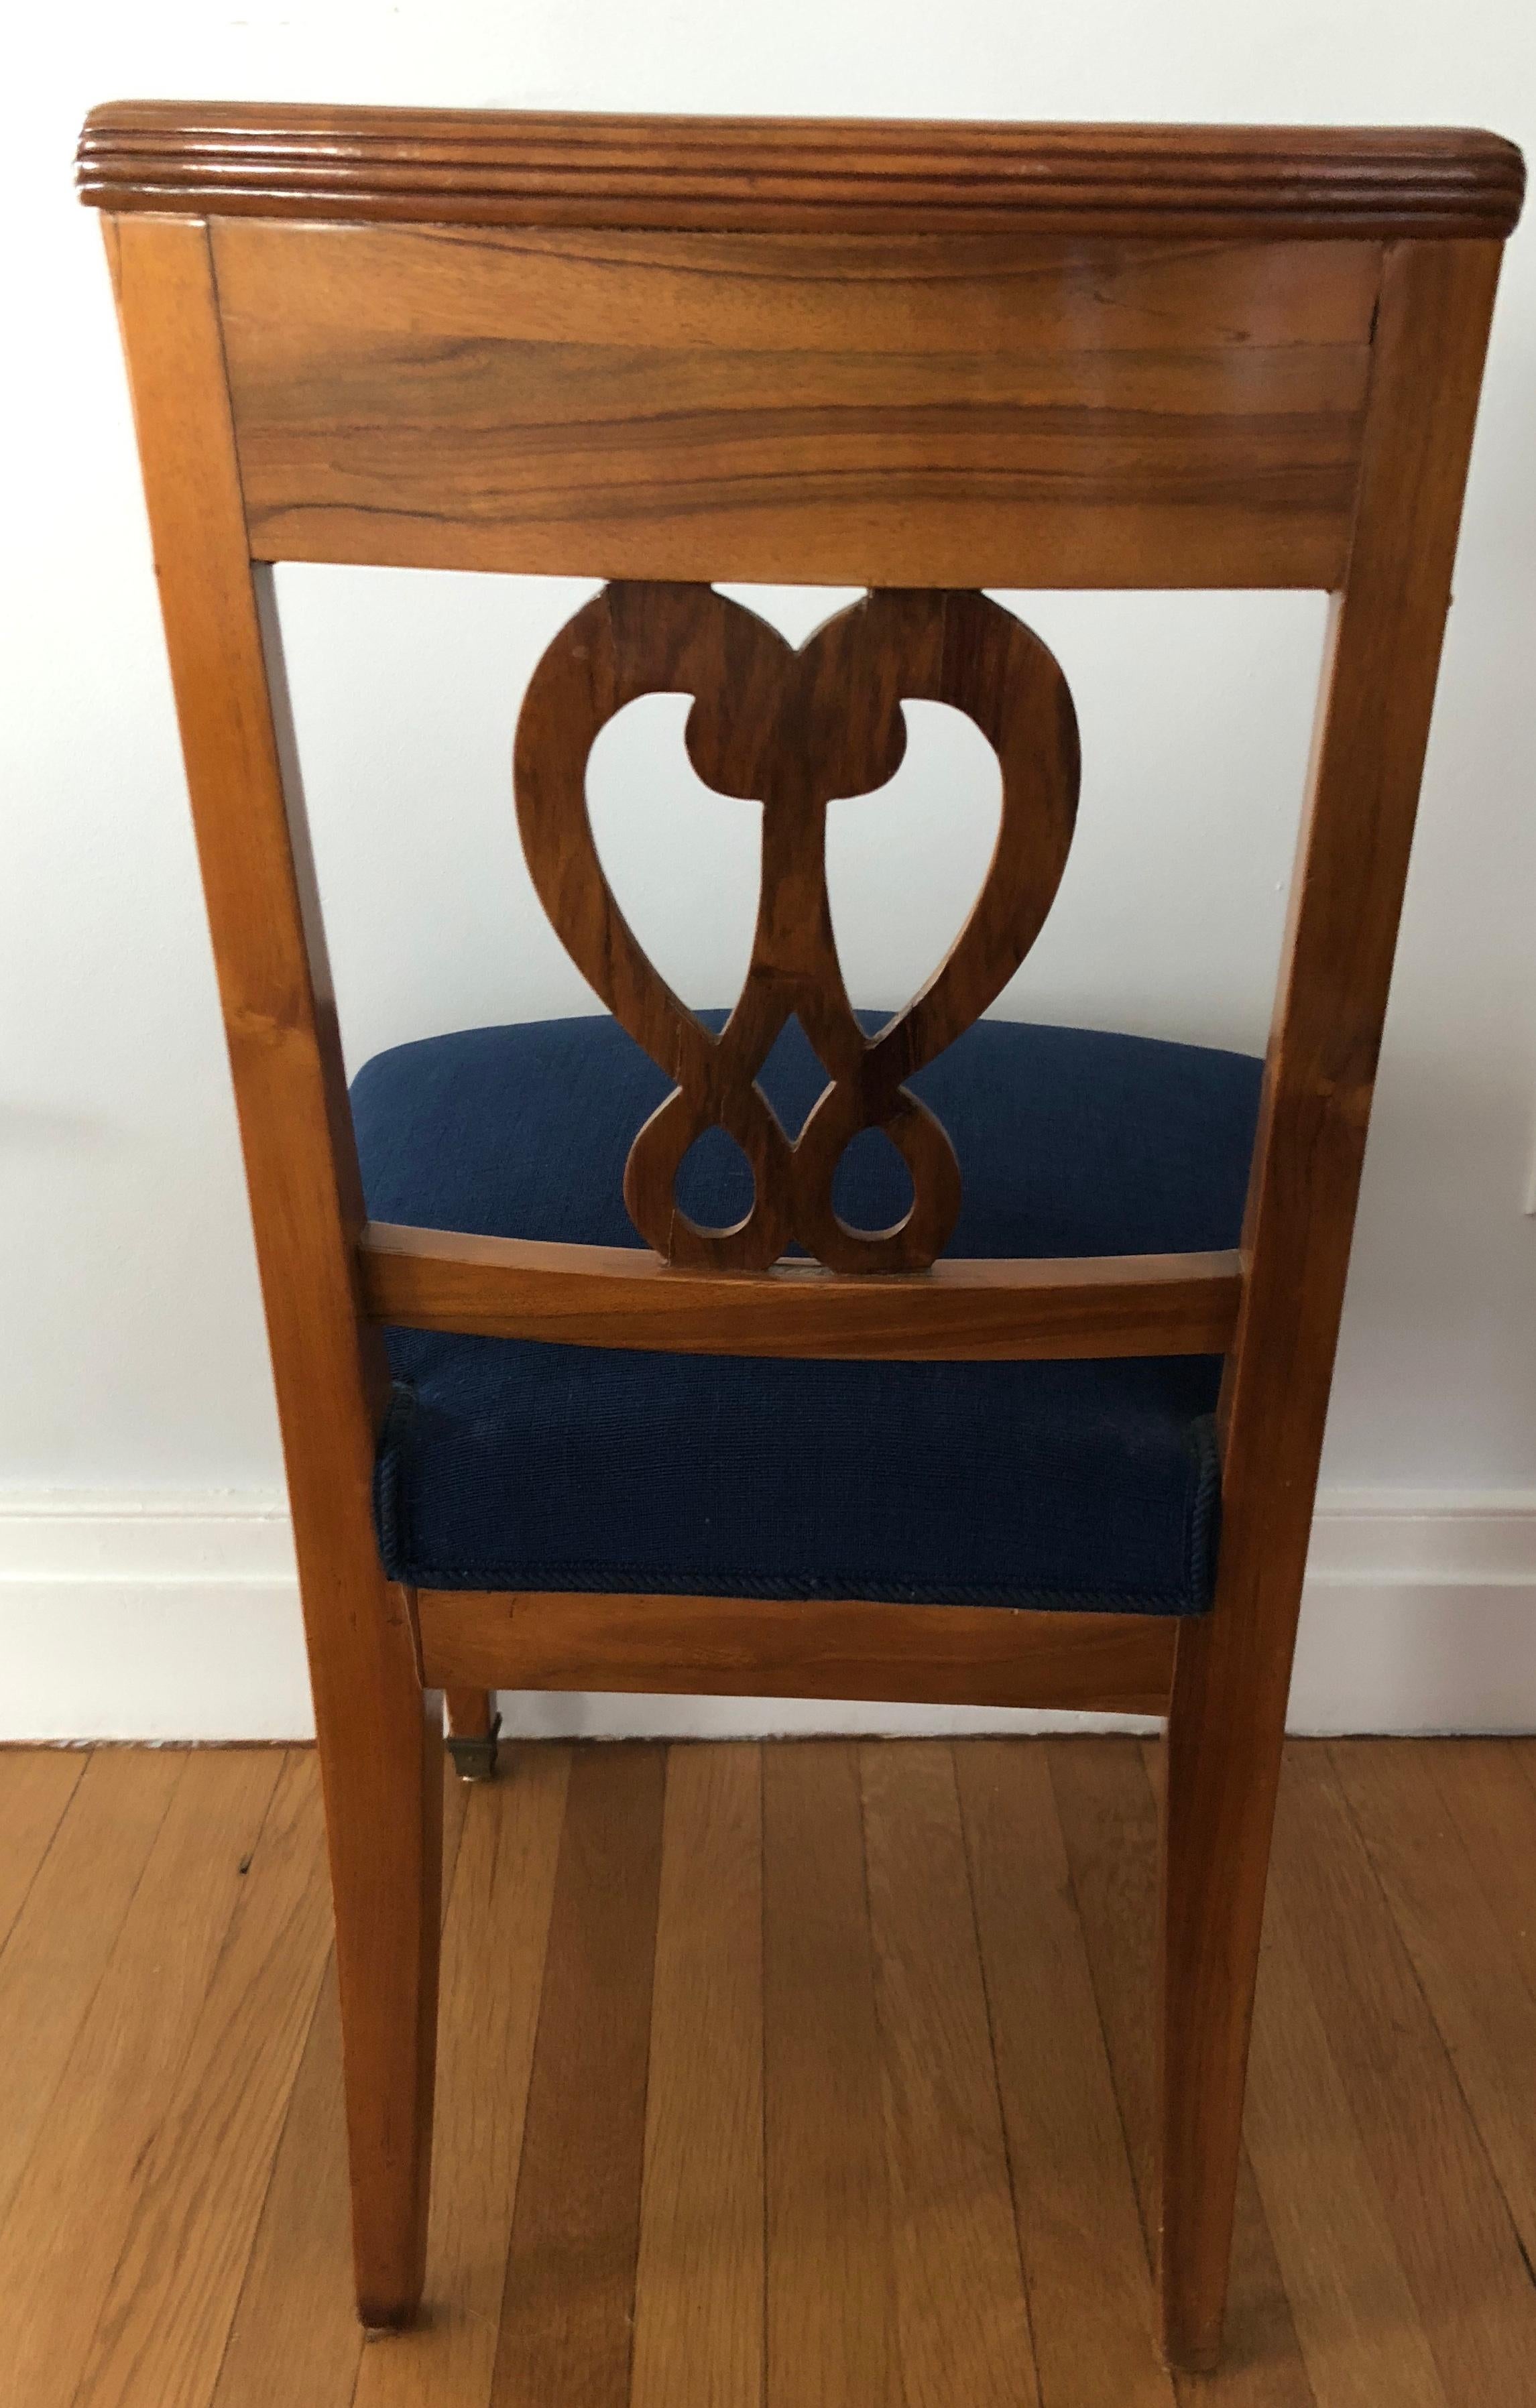 A set of four Biedermeier chairs, Switzerland, 1820-1830, walnut veneer. Beautiful back with a “Pretzel”decor and a beautiful carving on the top of the chair. The chairs are in good original condition.